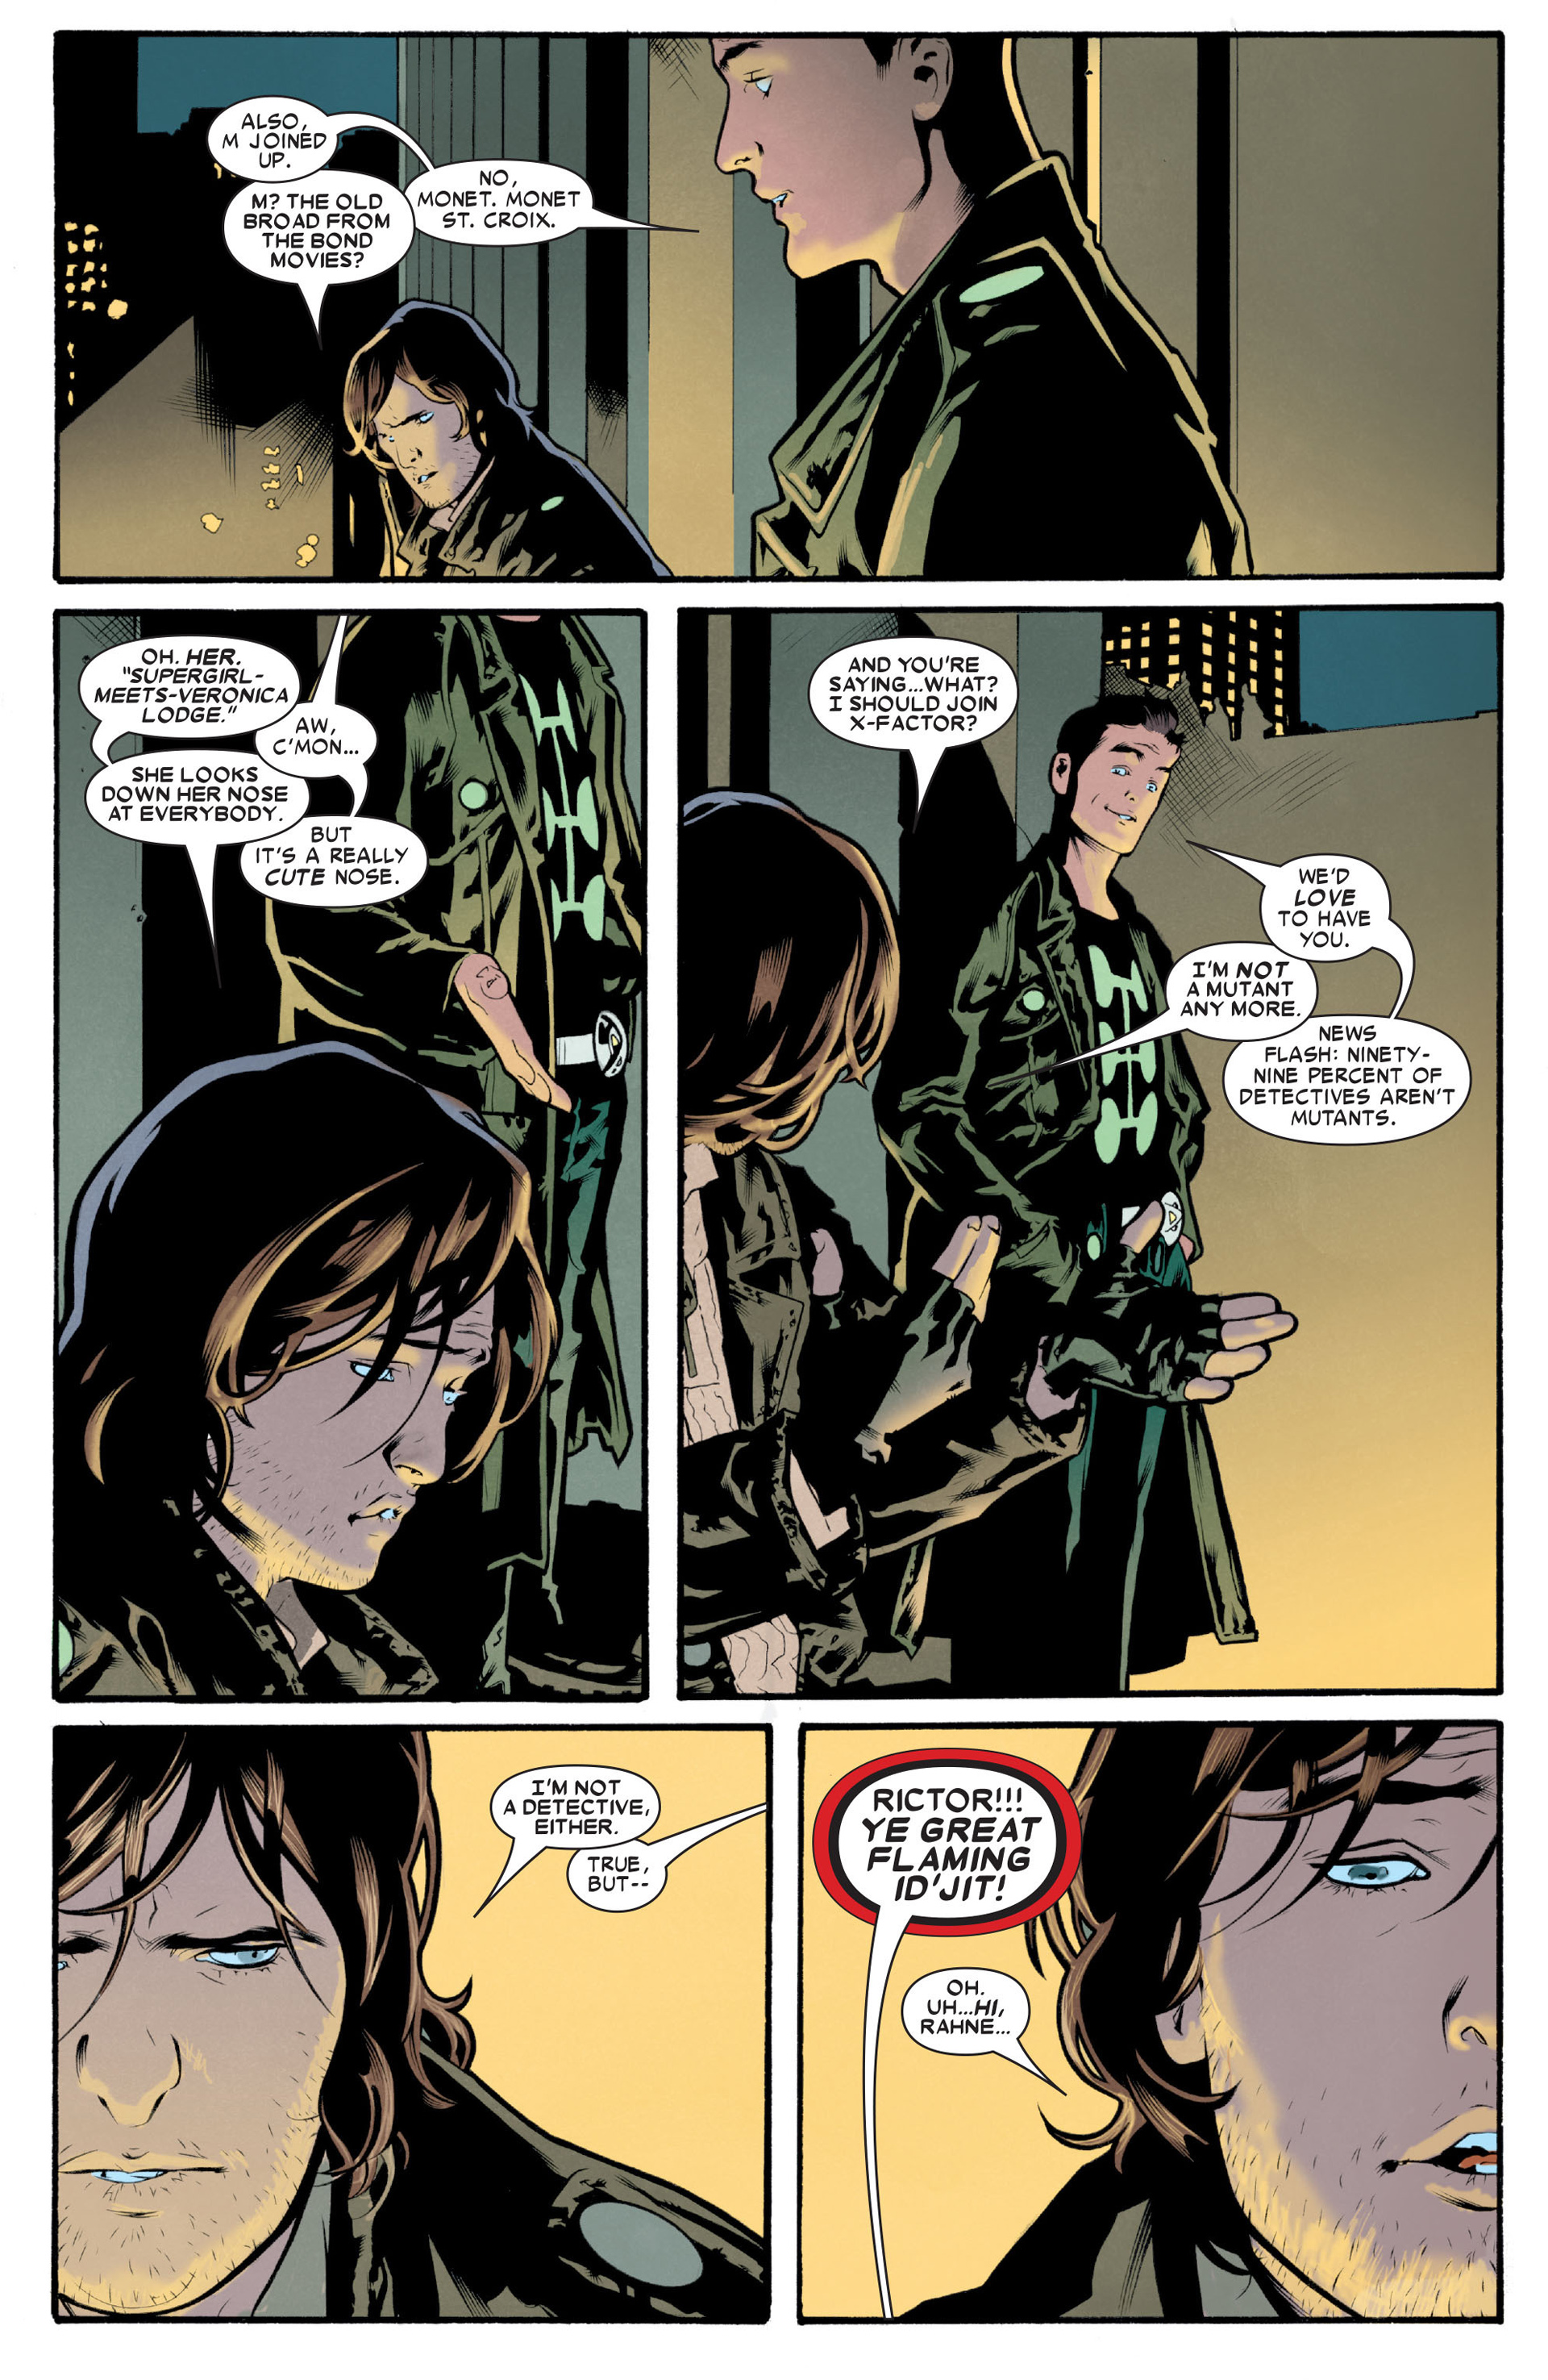 X-Factor (2006) 1 Page 18